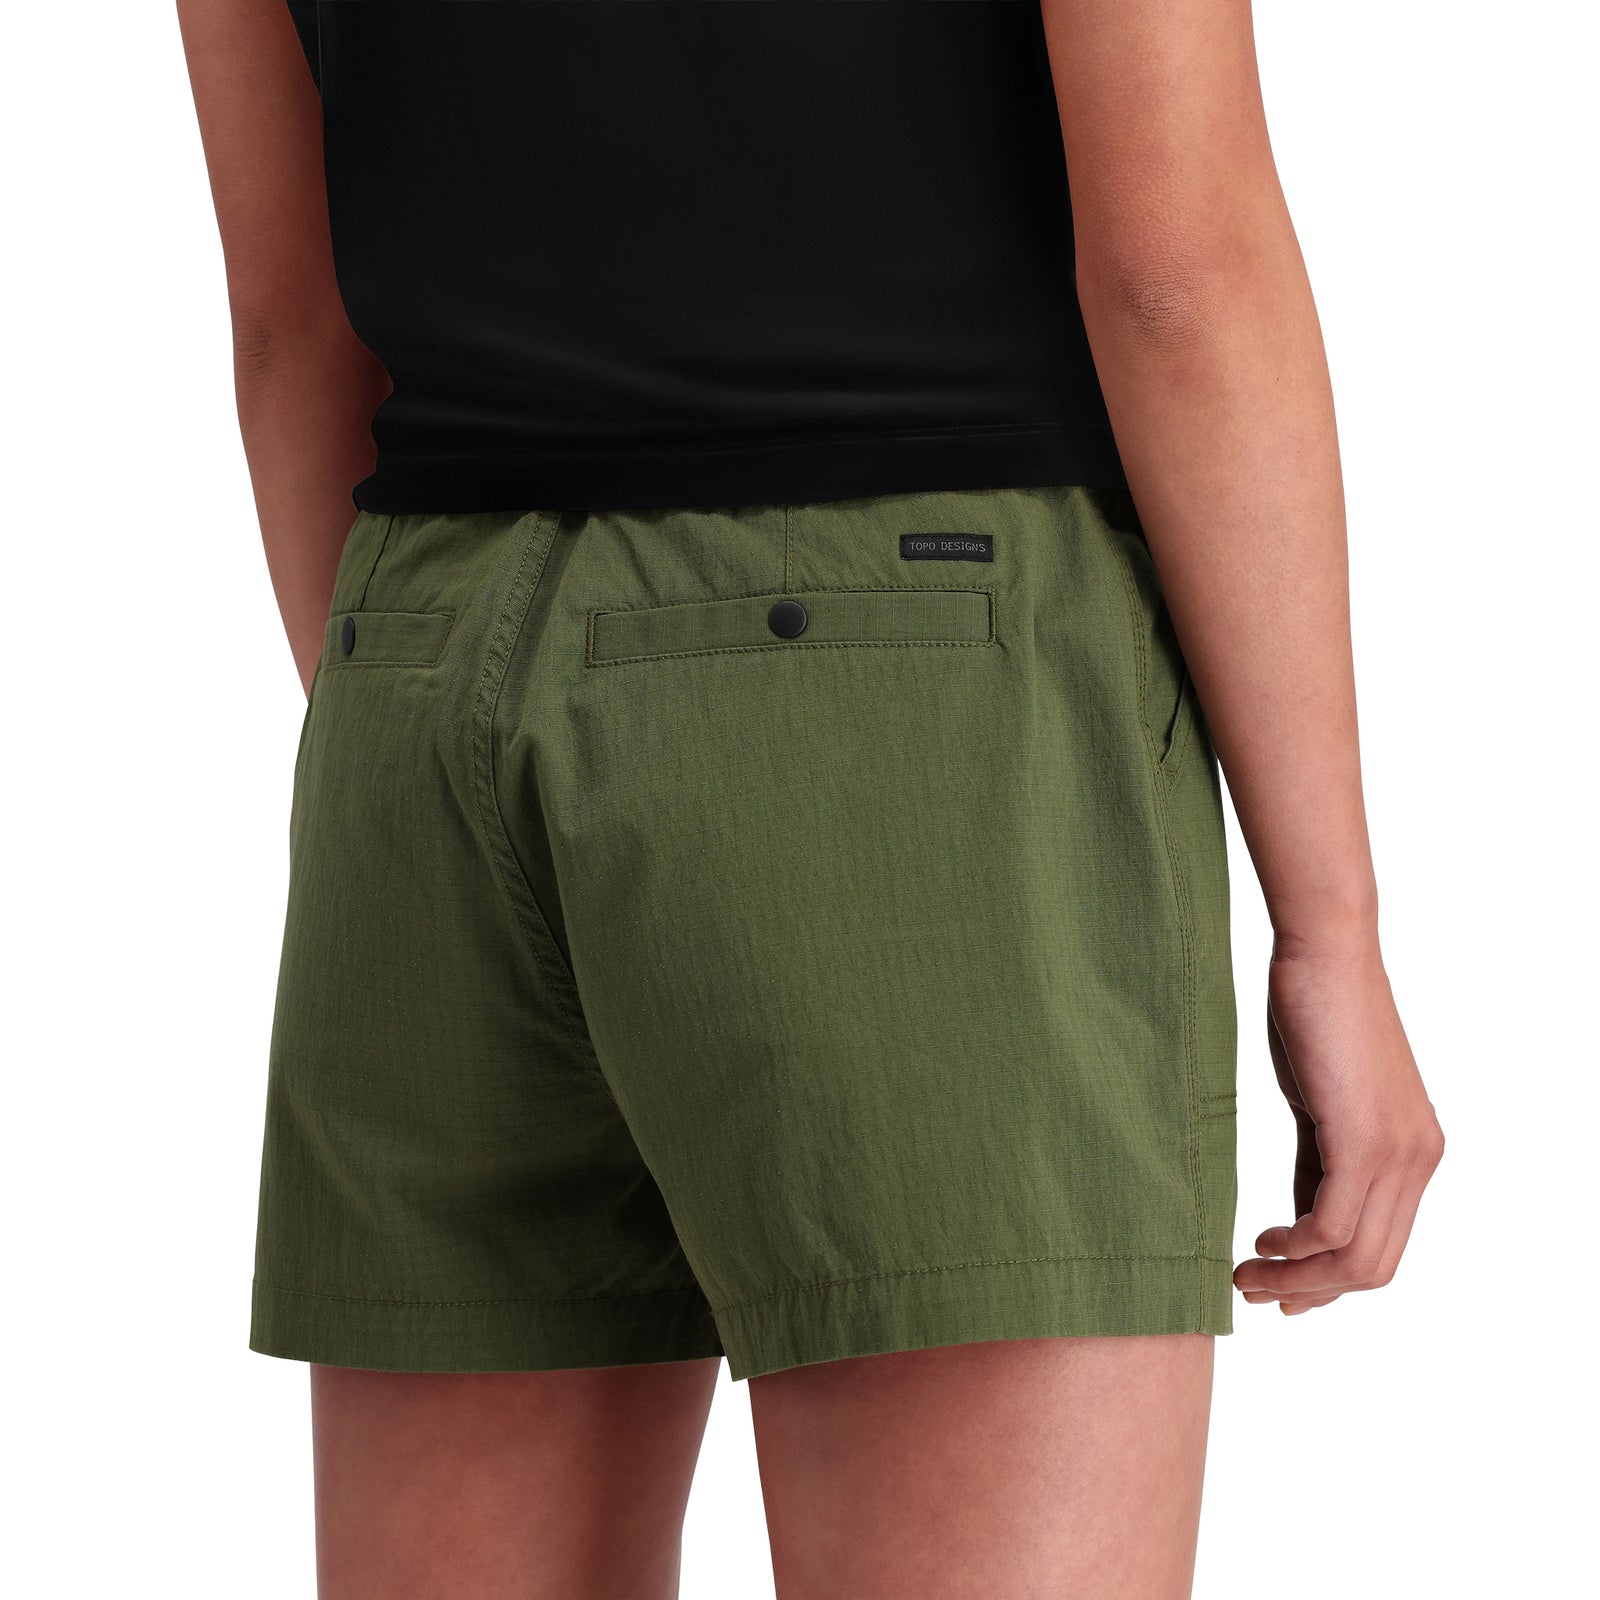 Detail shot of Topo Designs Mountain Short Ripstop - Women's in "Olive"